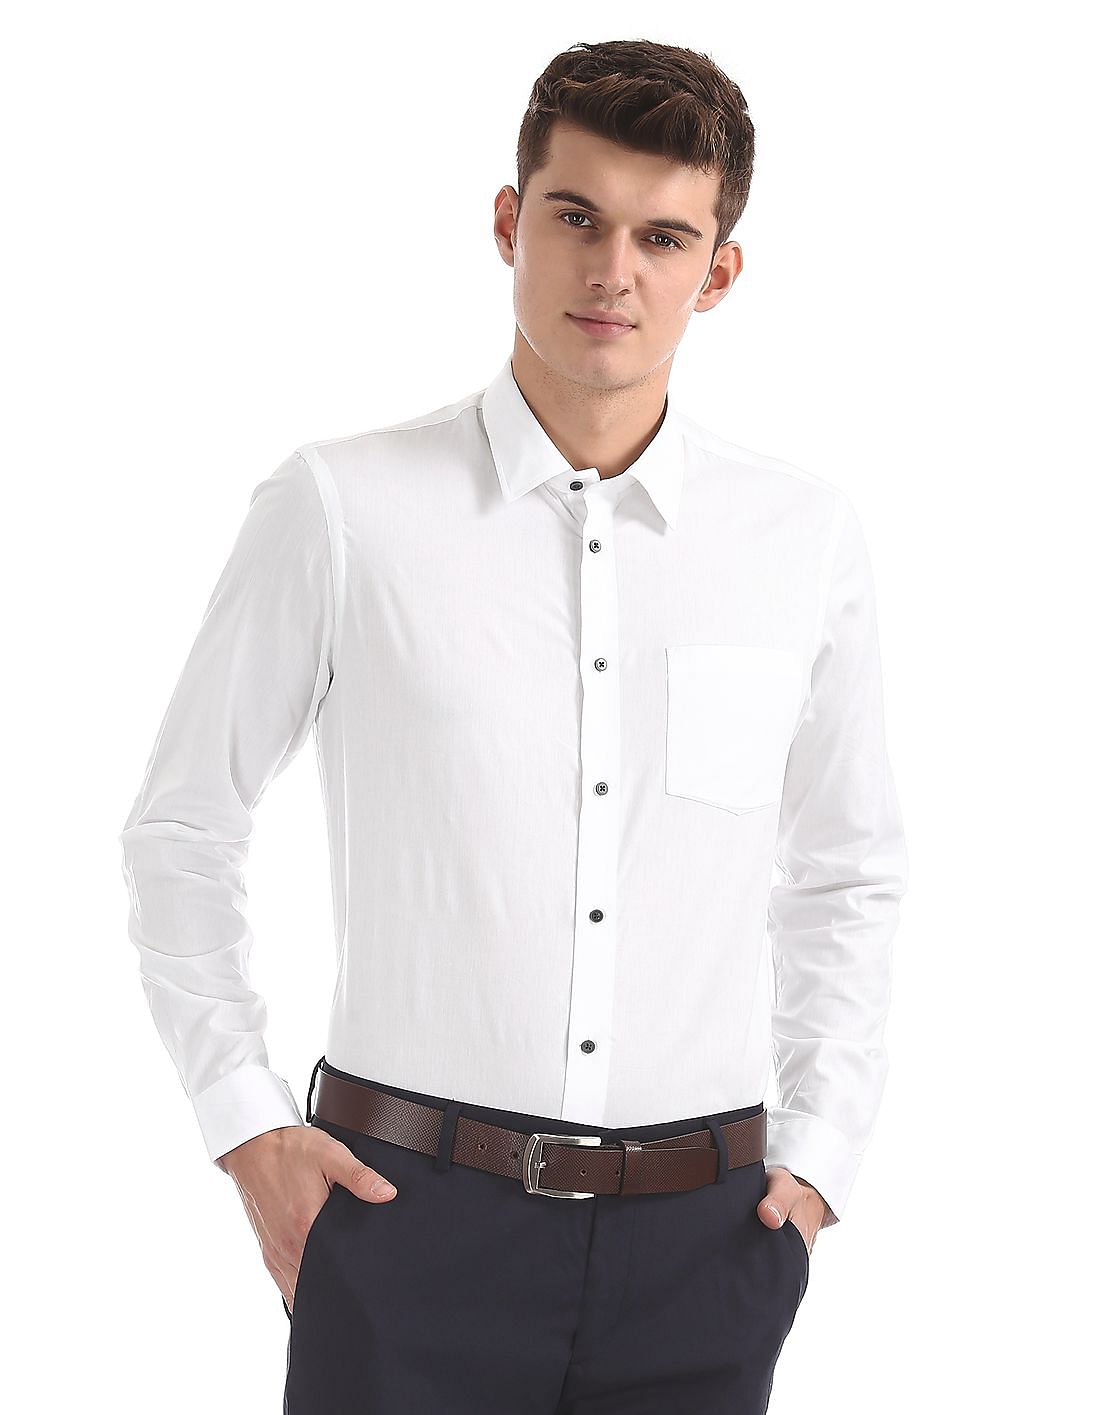 Buy Men Slim Fit French Placket Shirt online at NNNOW.com